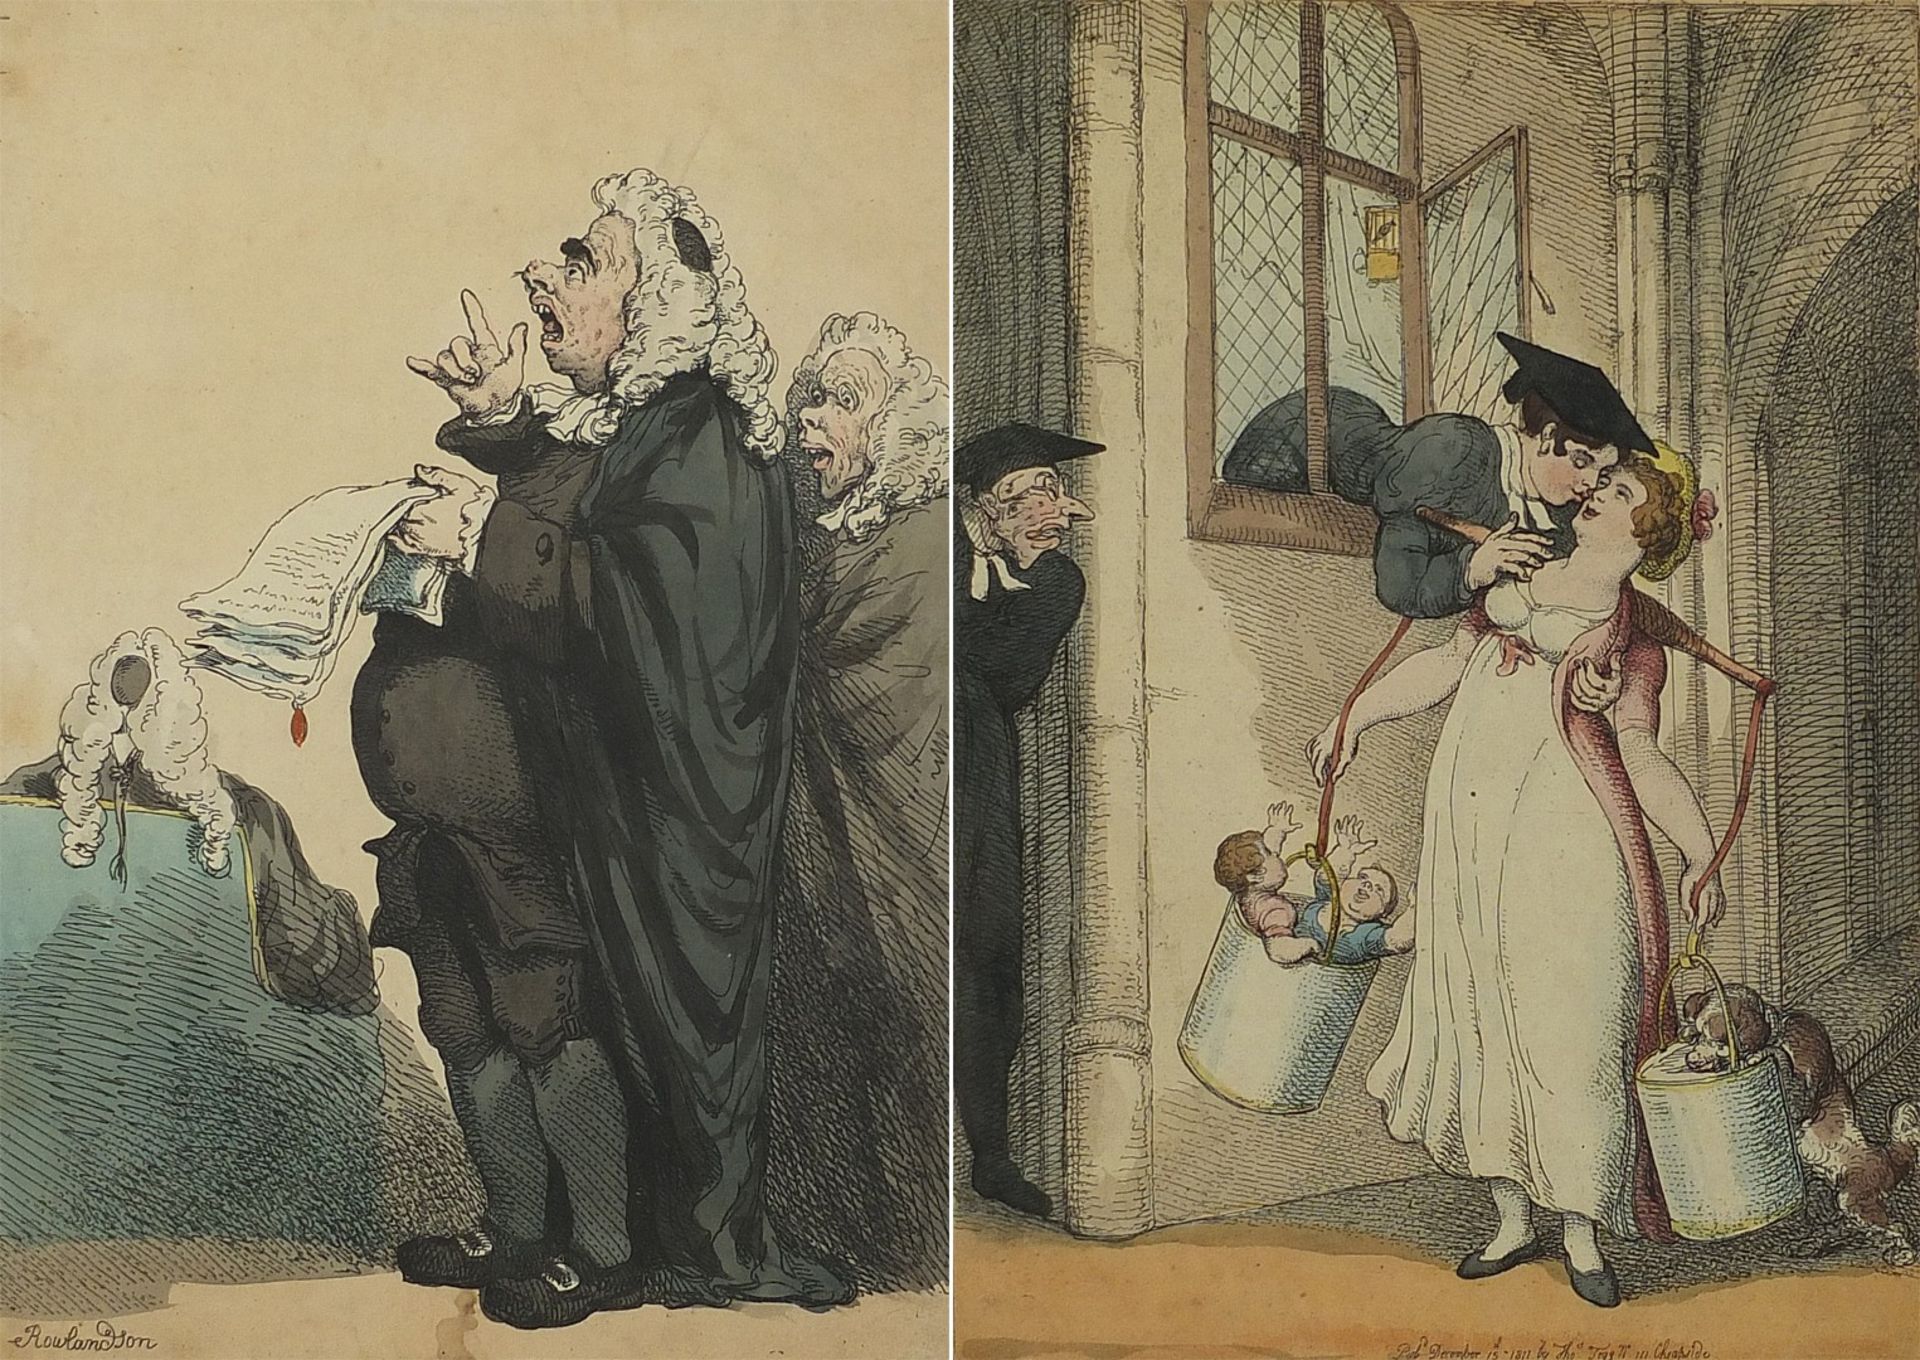 After Thomas Rowlandson - A Councillor and a Milksop, two early 19th century satirical prints in